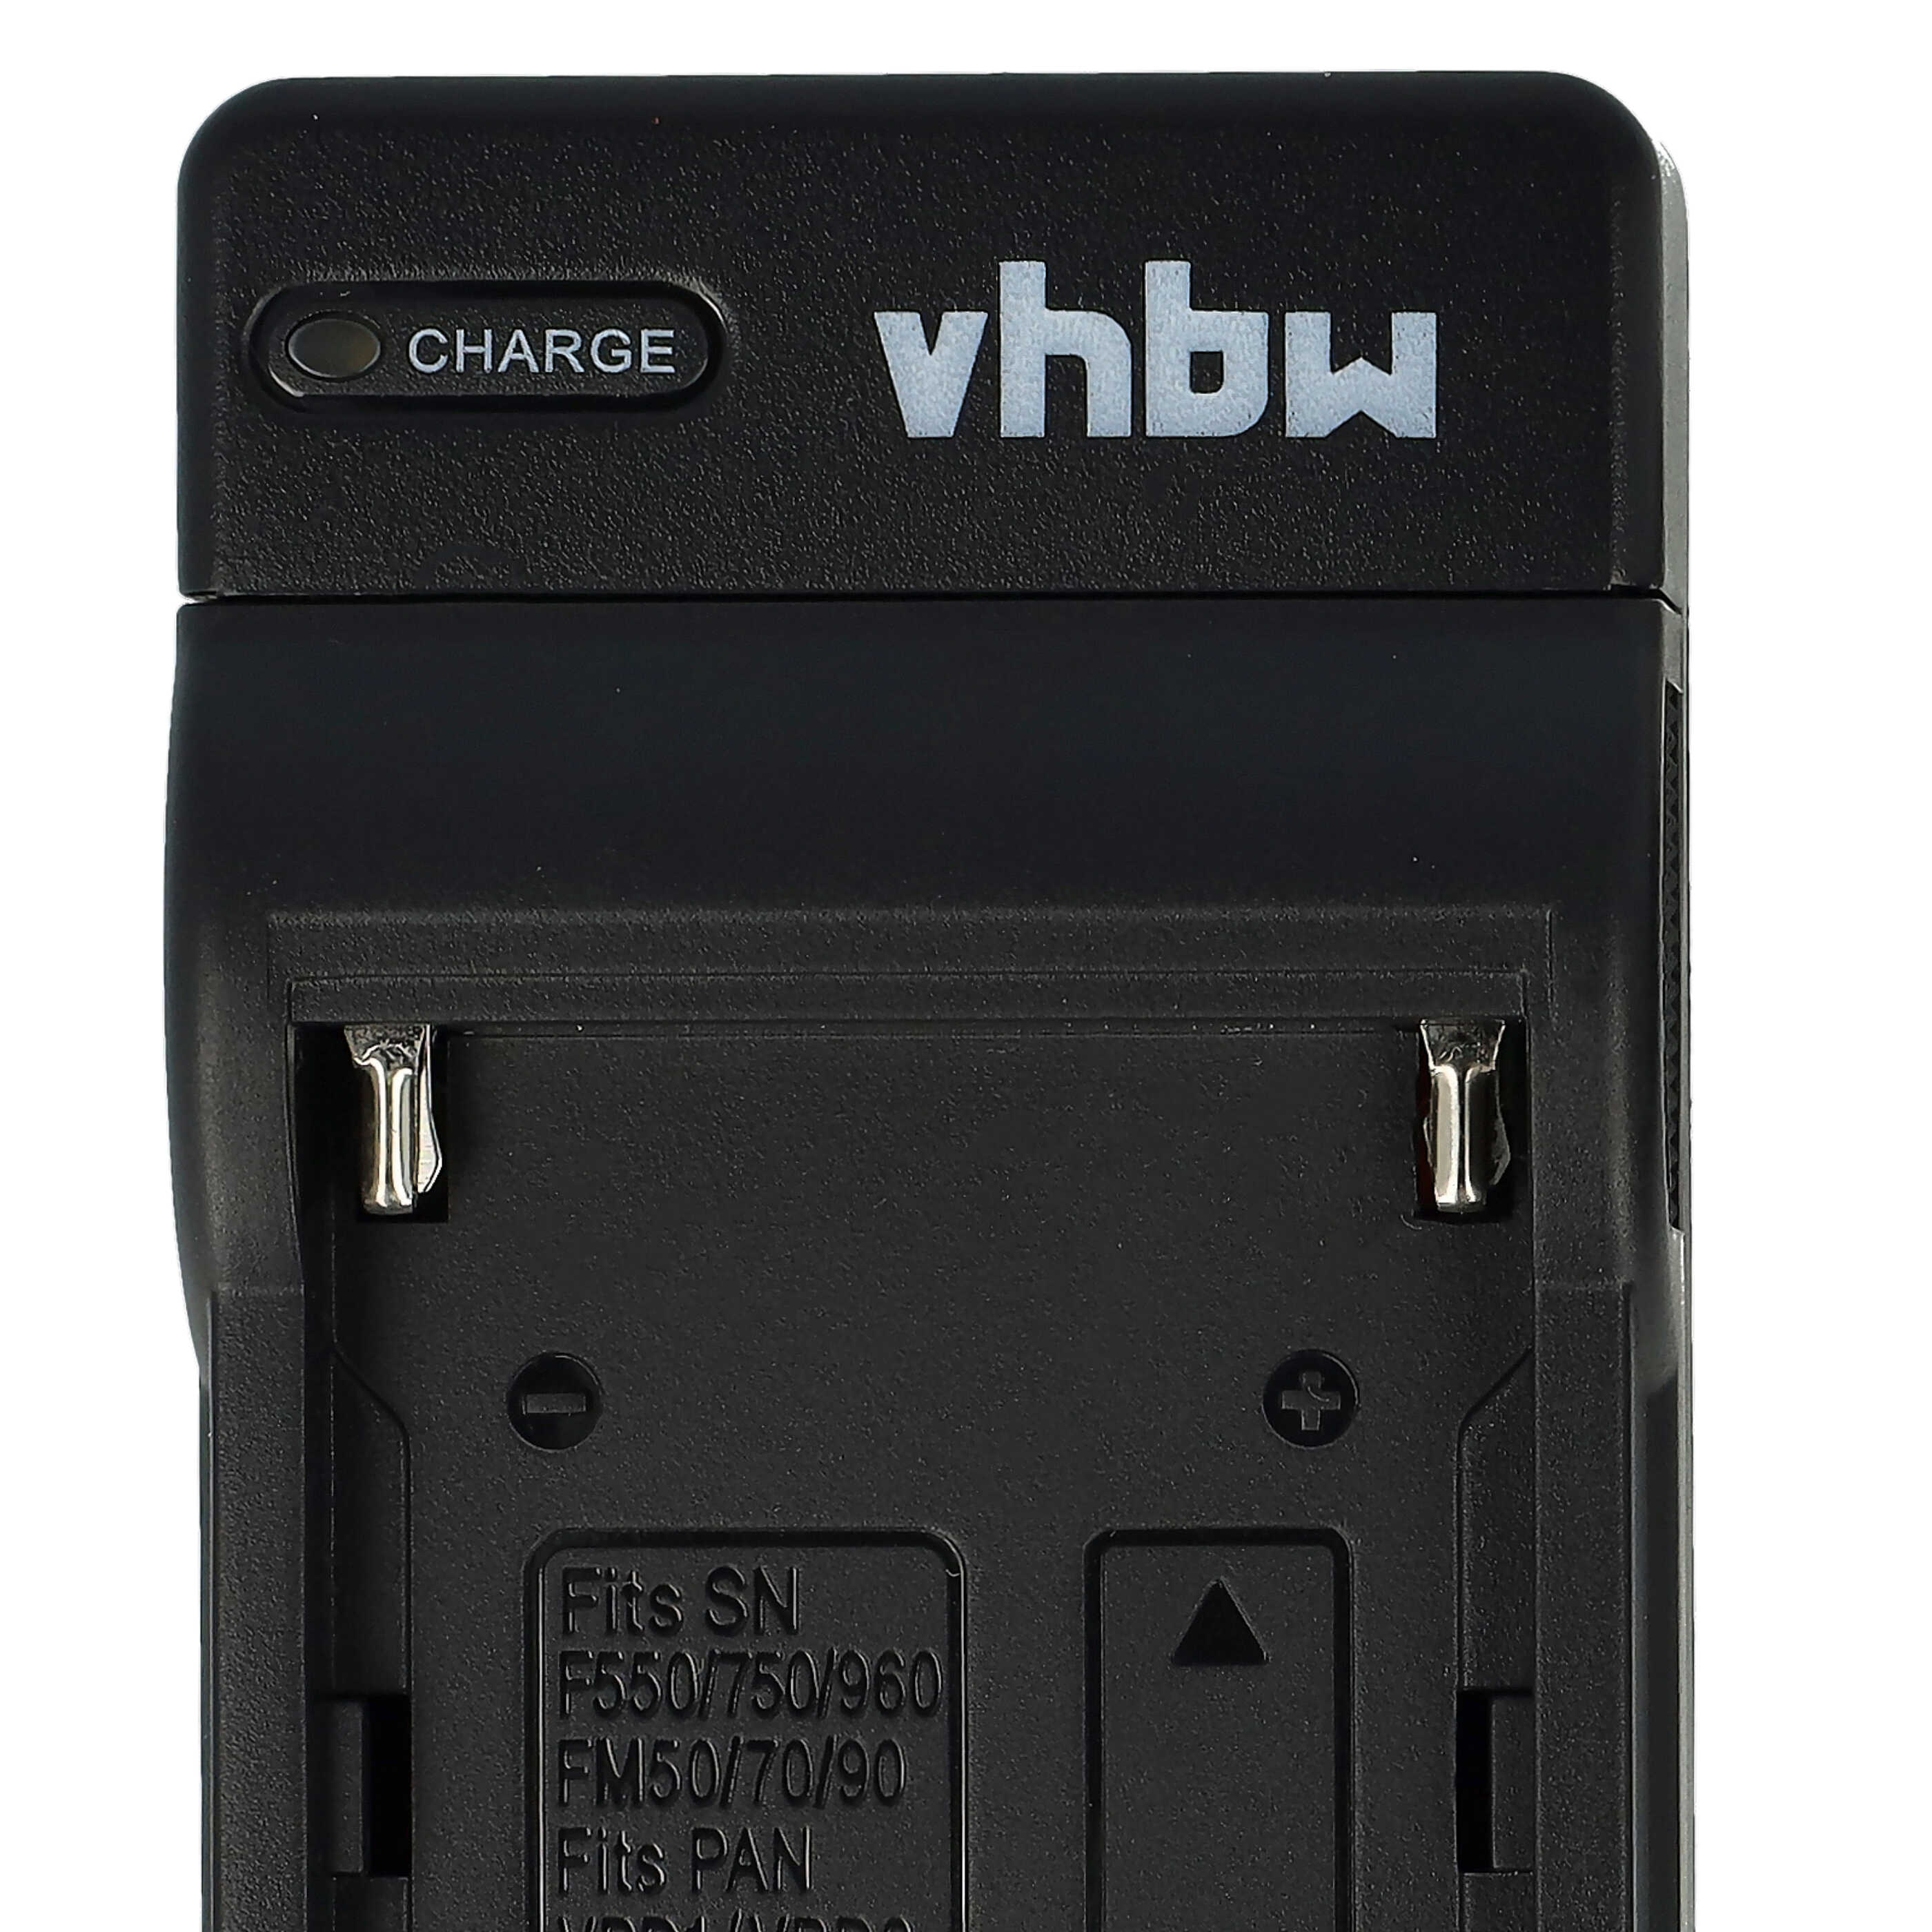 Battery Charger suitable for Panasonic VW-VBD1E Camera etc. - 0.5 A, 8.4 V